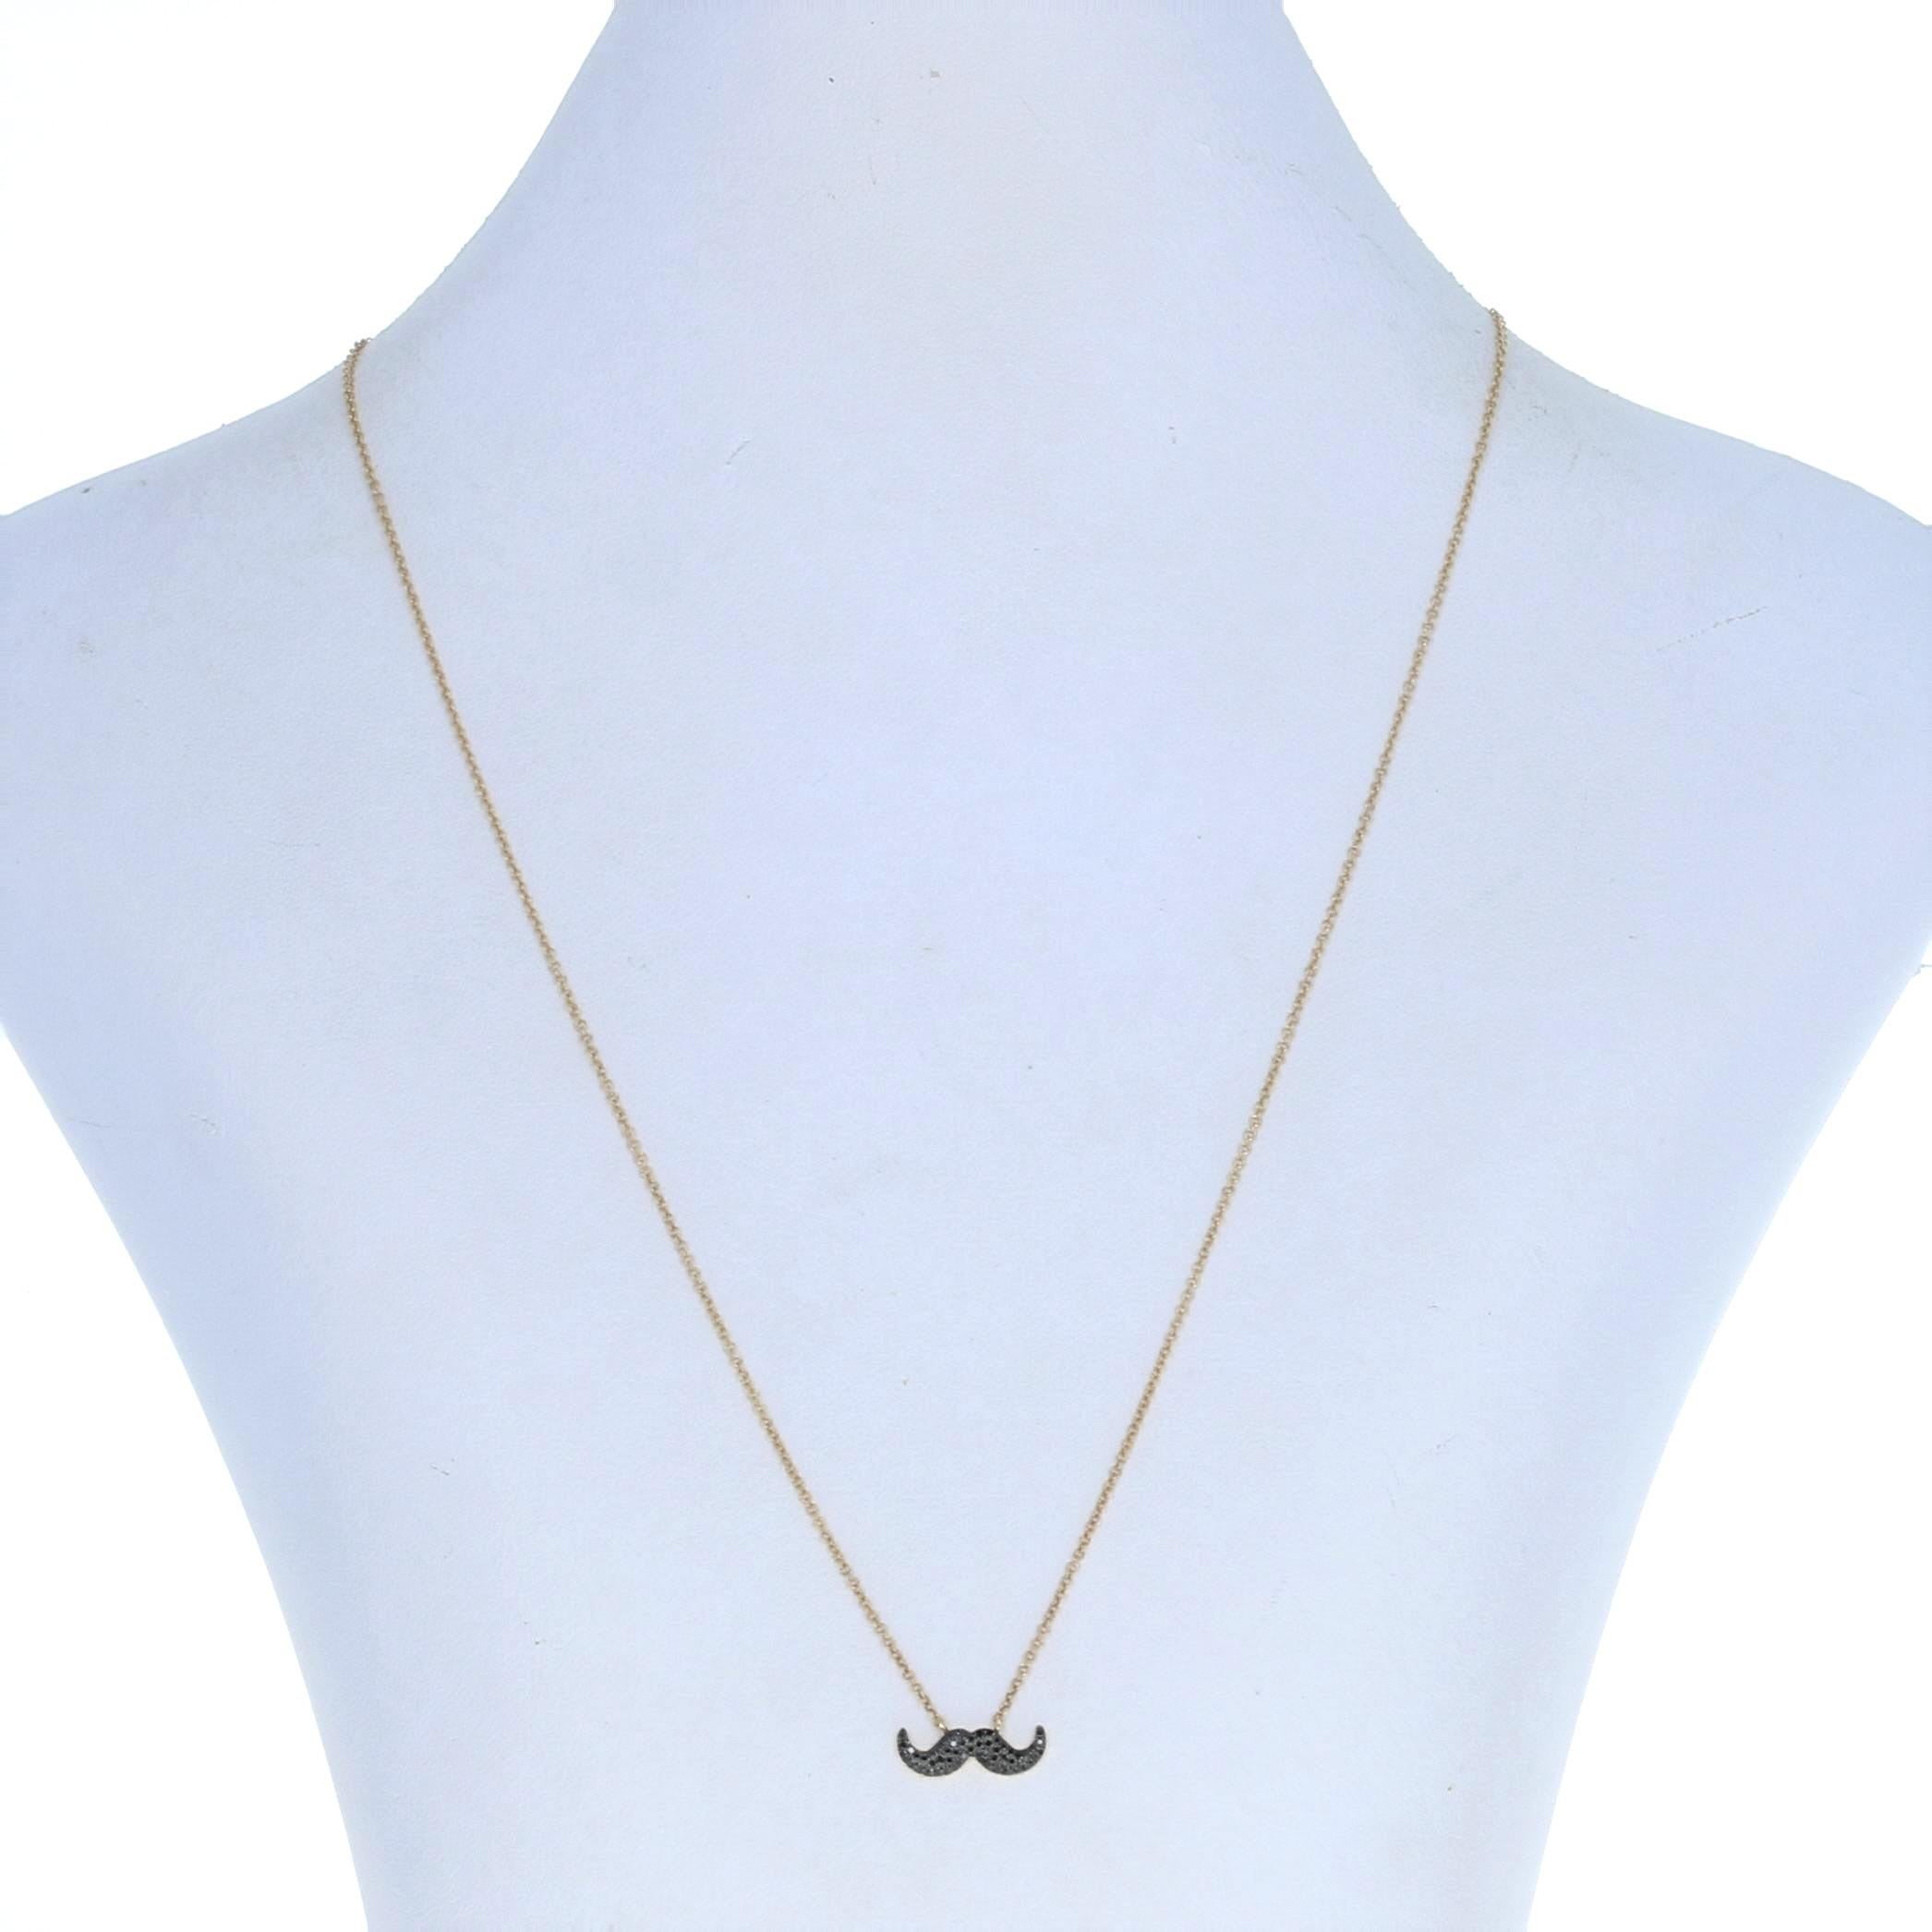 Metal Content: 14k Yellow Gold 

Stone Information: 
Natural Diamonds
Treatment: Color Enhanced
Total Carats: .12ctw
Cut: Single 
Color: Black   

Chain Style: Cable
Fastening Type: Lobster Claw Clasp
Theme: Handlebar Mustache 

Attached Pendant